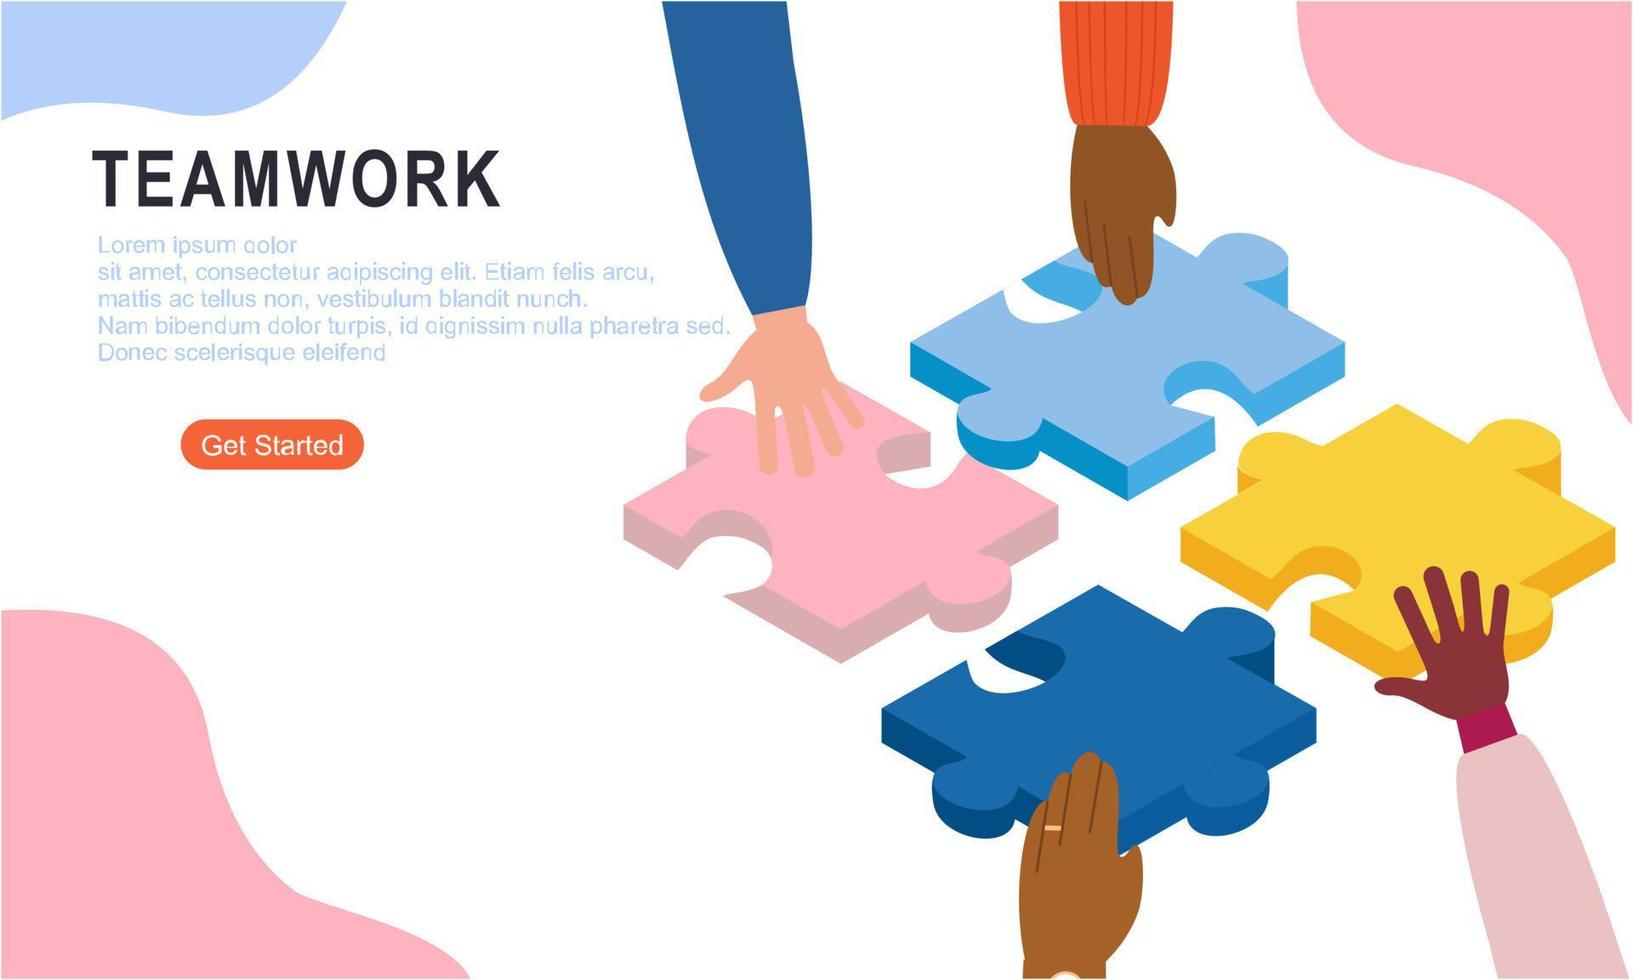 Teamwork concept with hands and puzzle illutration vector